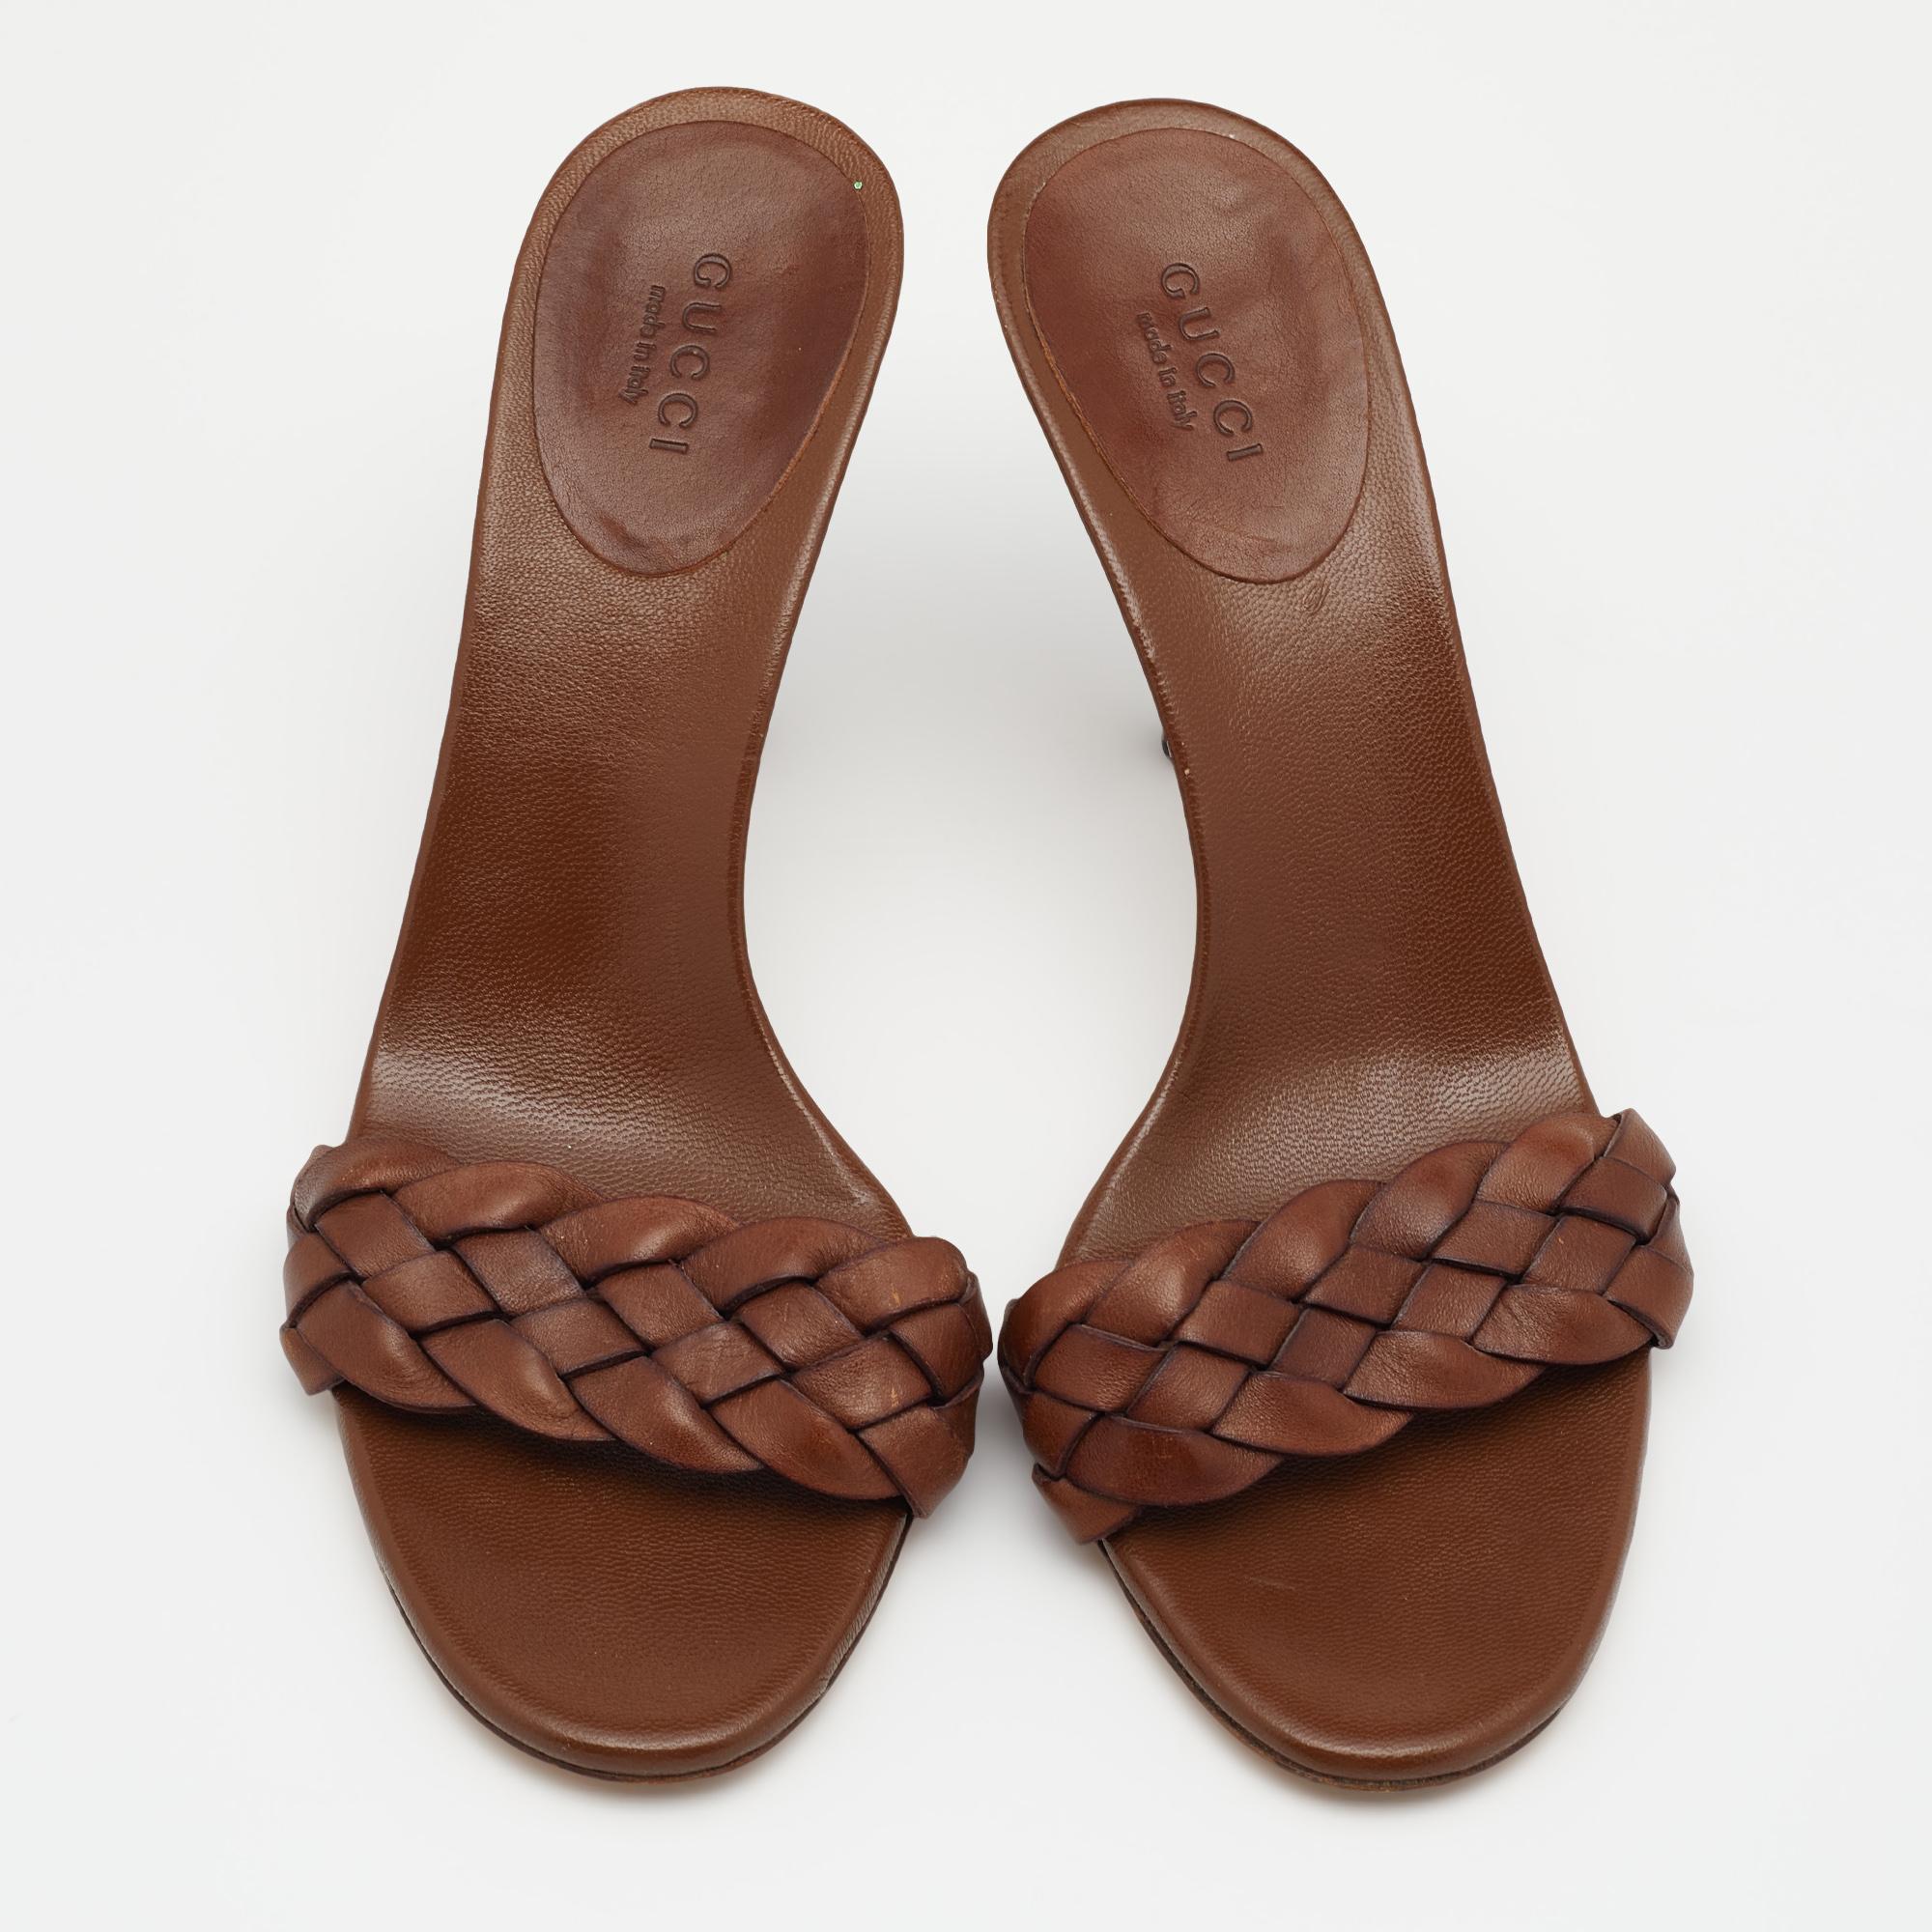 Gucci Brown Woven Leather Slide Sandals Size 36.5 1